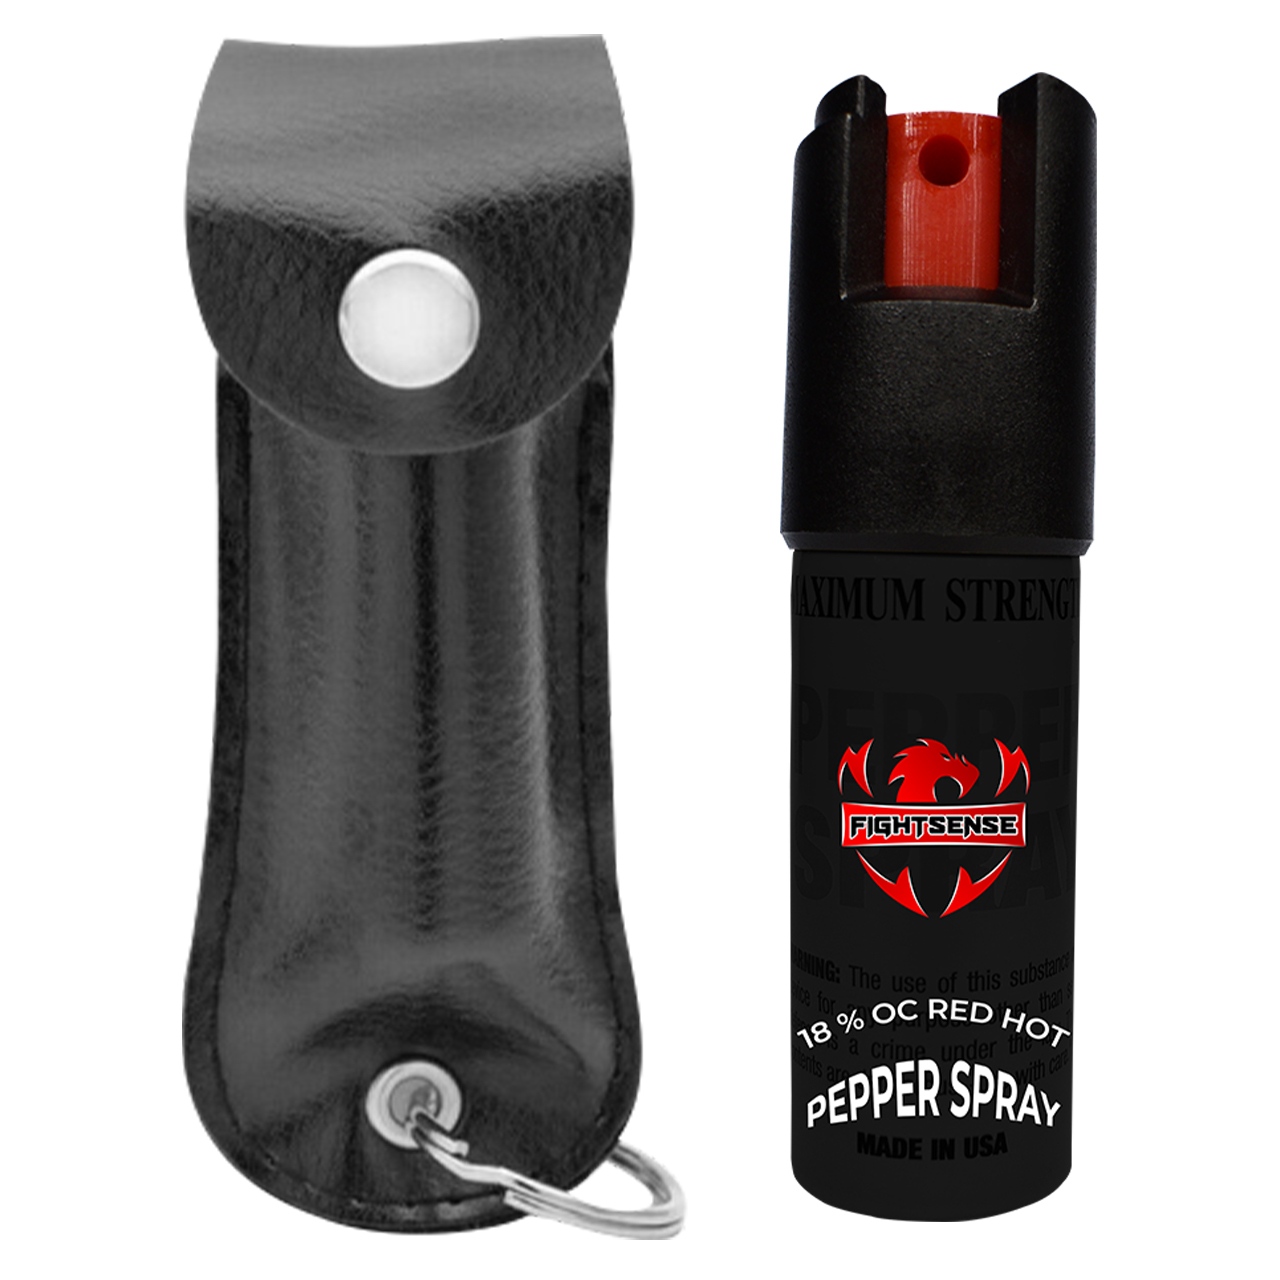 Pepper Spray Your Personal Alarm Solution